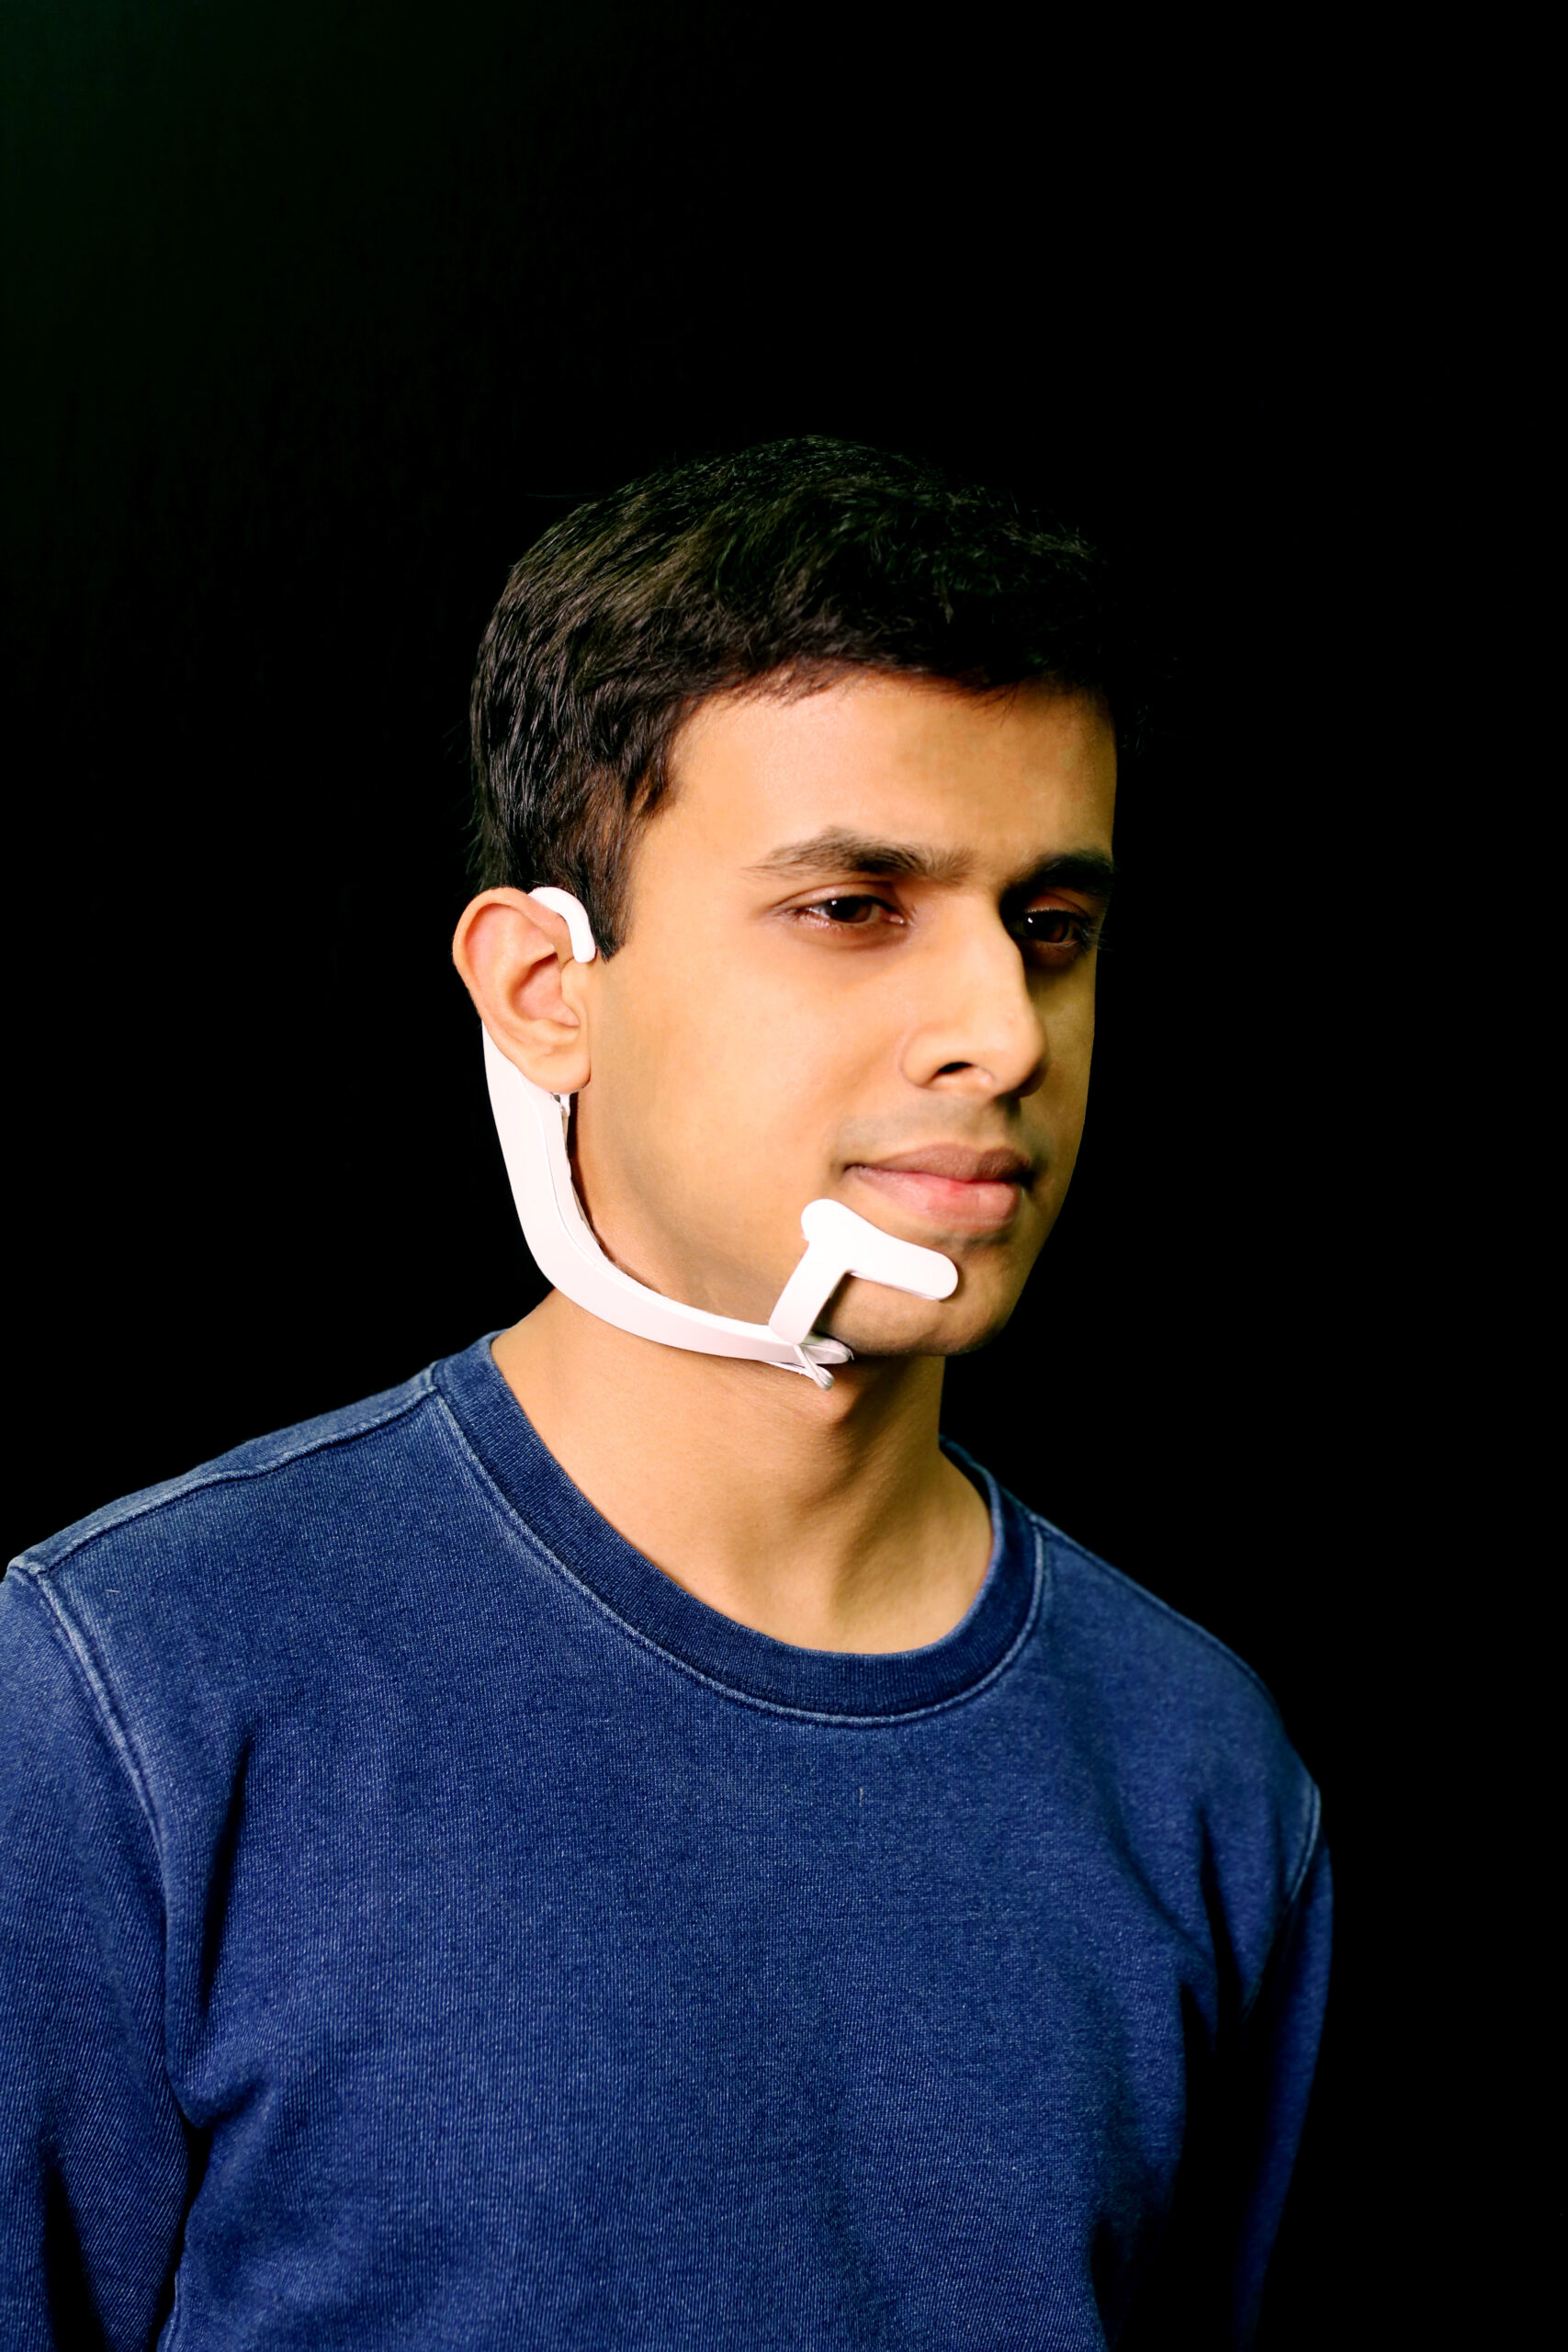 MIT is making a device that can ‘hear’ the words you say silently